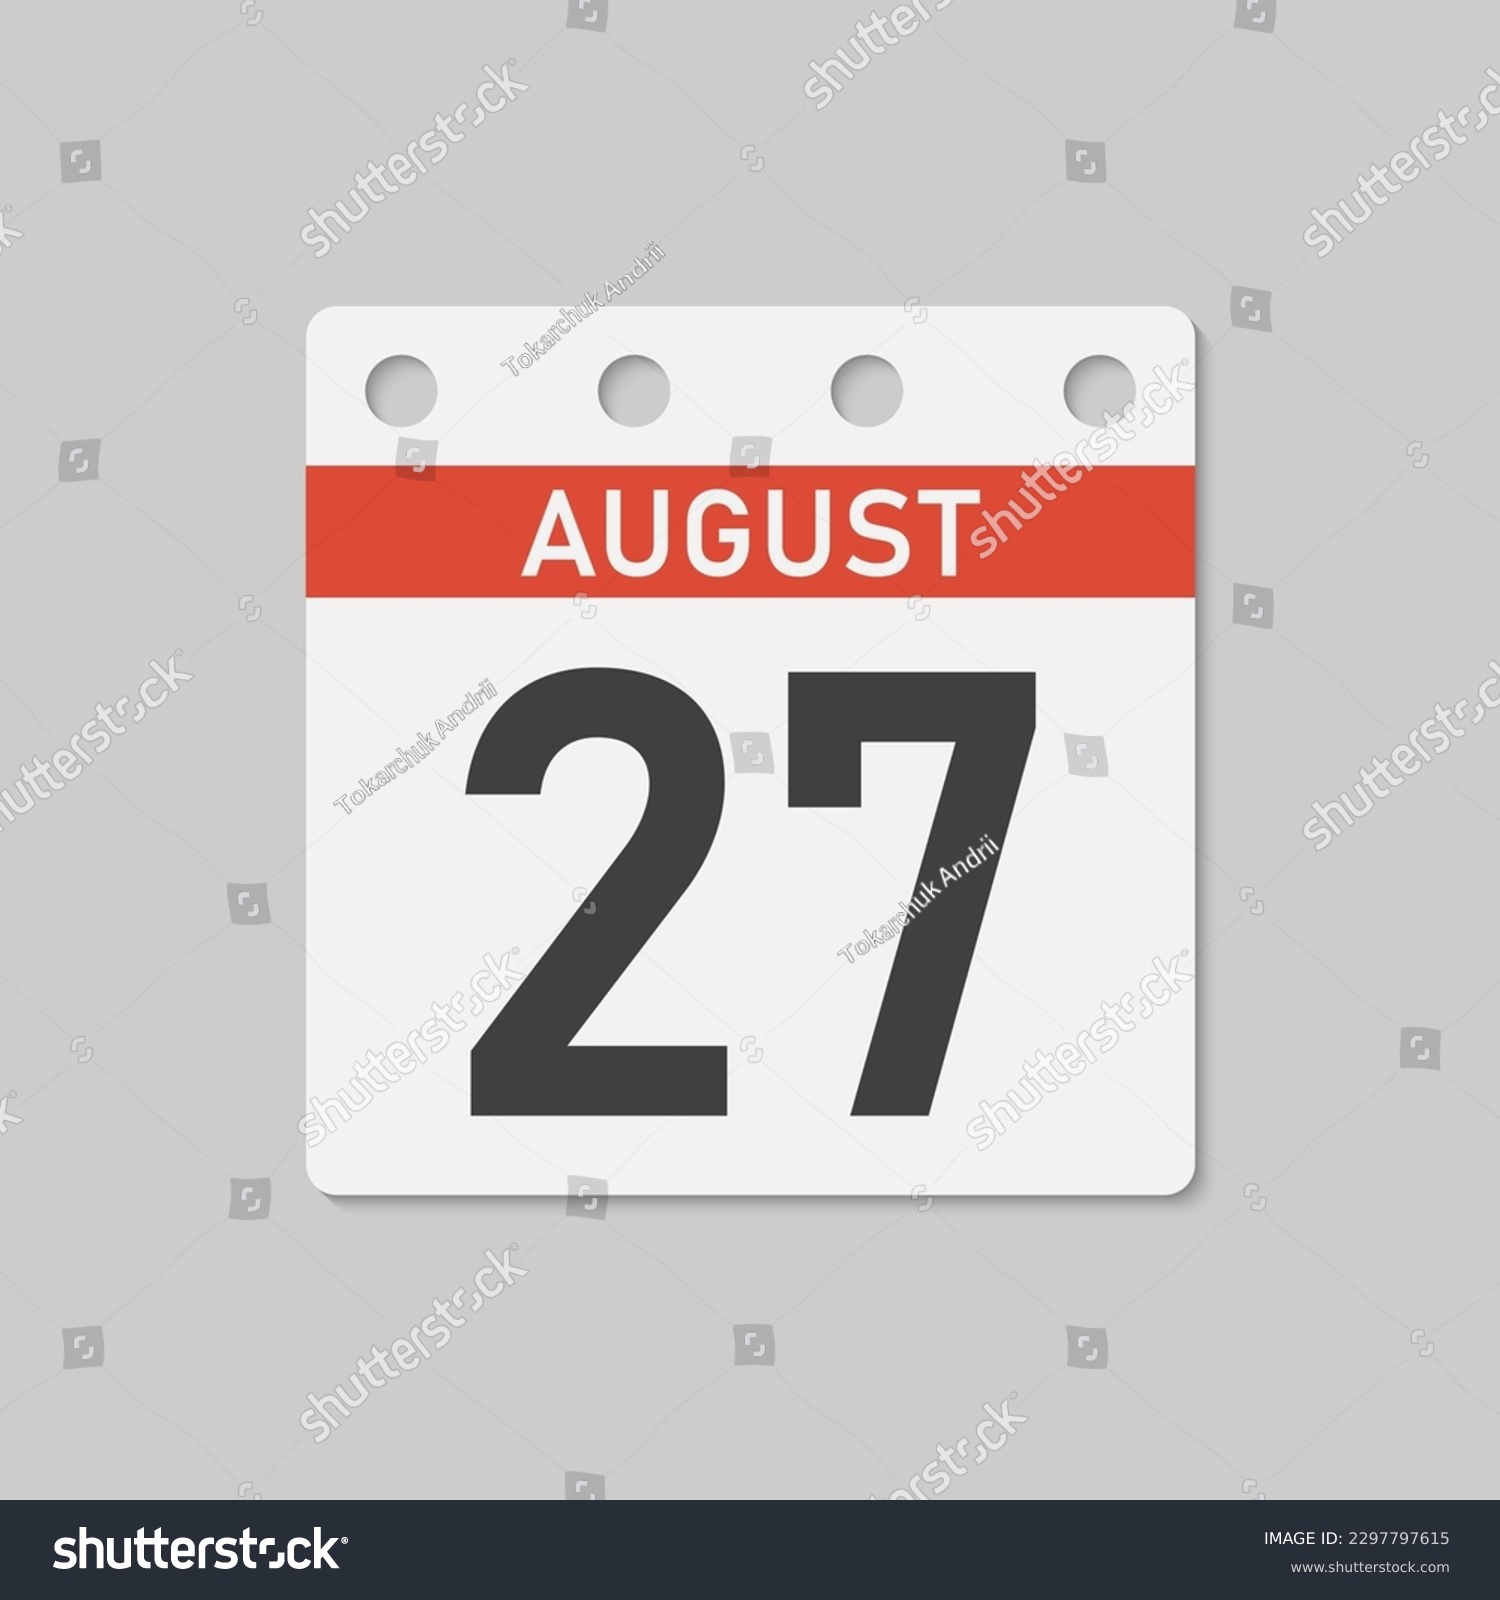 SVG of Minimal icon page calendar - 27 August. Vector illustration day of the month. 27th day of month Sunday, Monday, Tuesday, Wednesday, Thursday, Friday, Saturday. Template for anniversary, reminder, plan svg